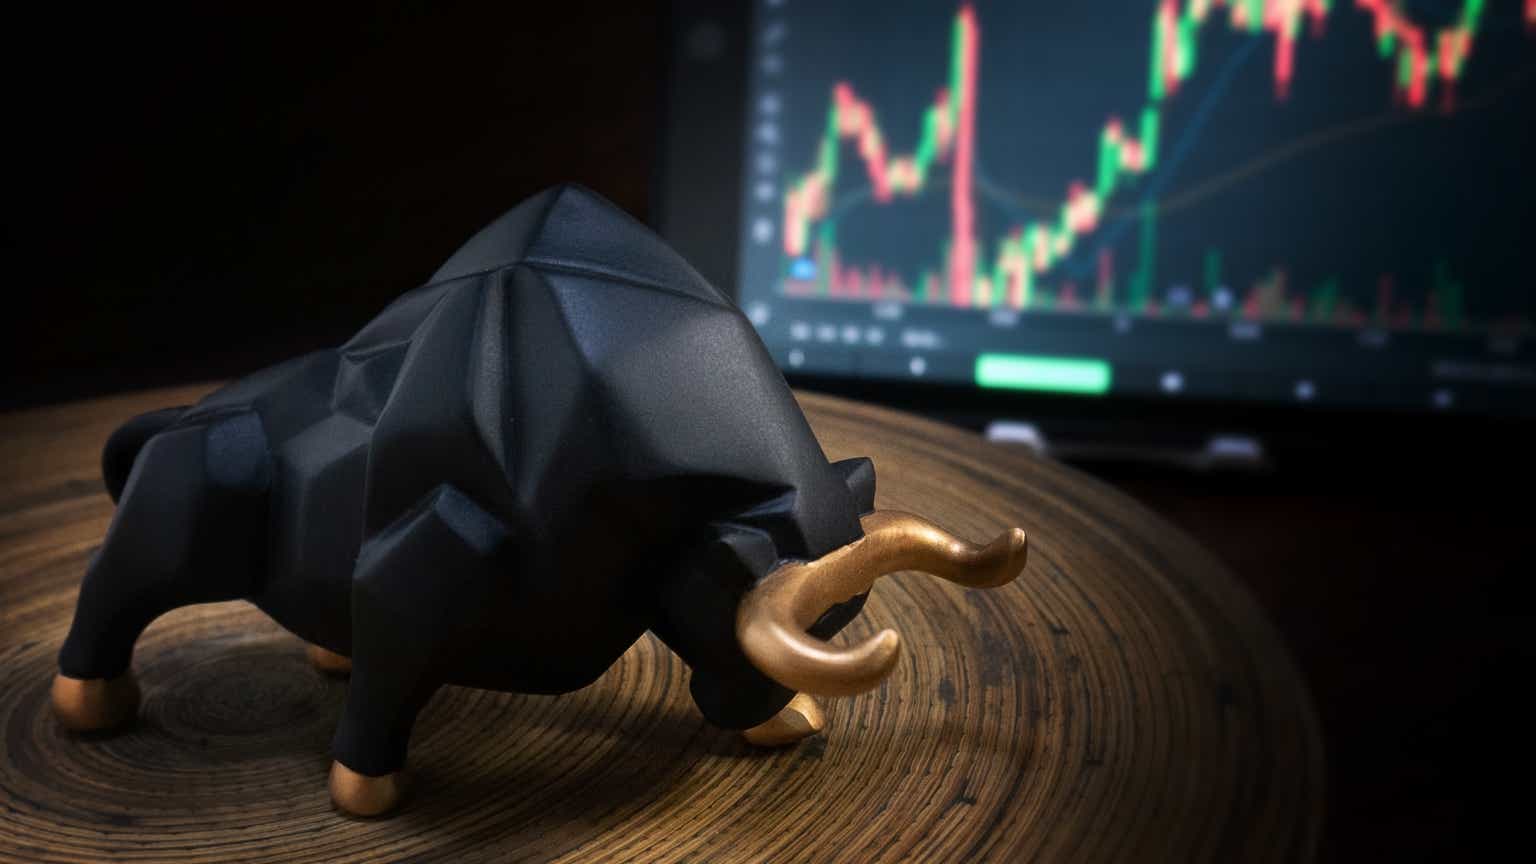 What Is A Bull Market And How Does It Impact Investors?